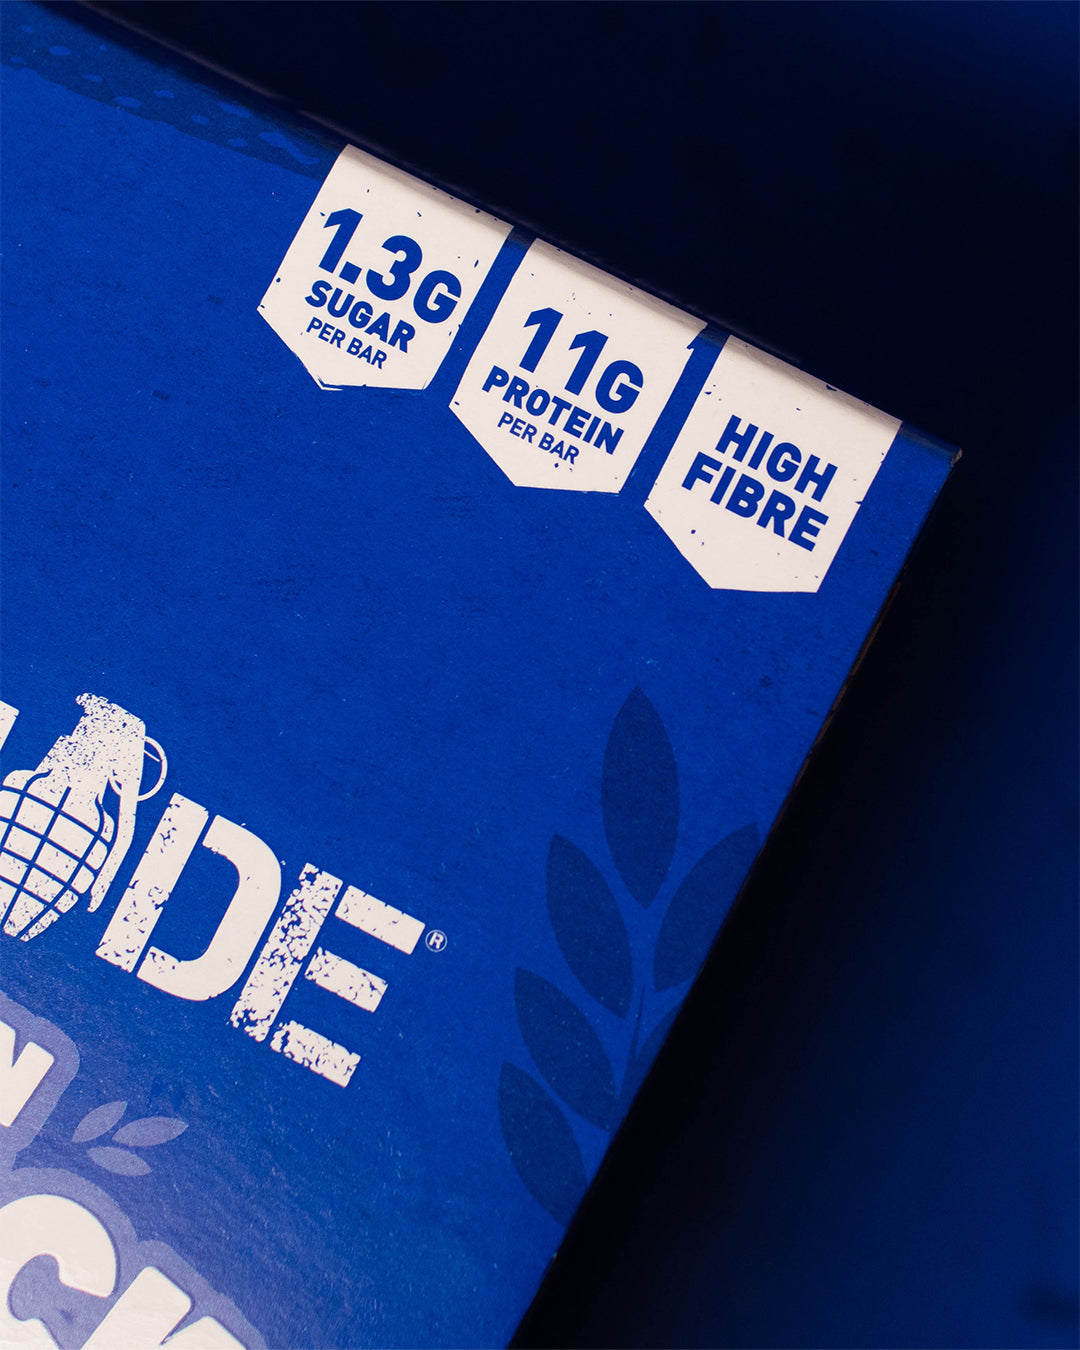 Blueberry Protein Flapjack Box Showing Key Nutritions (1.3g Sugar, 11g Protein, High in Fibre)